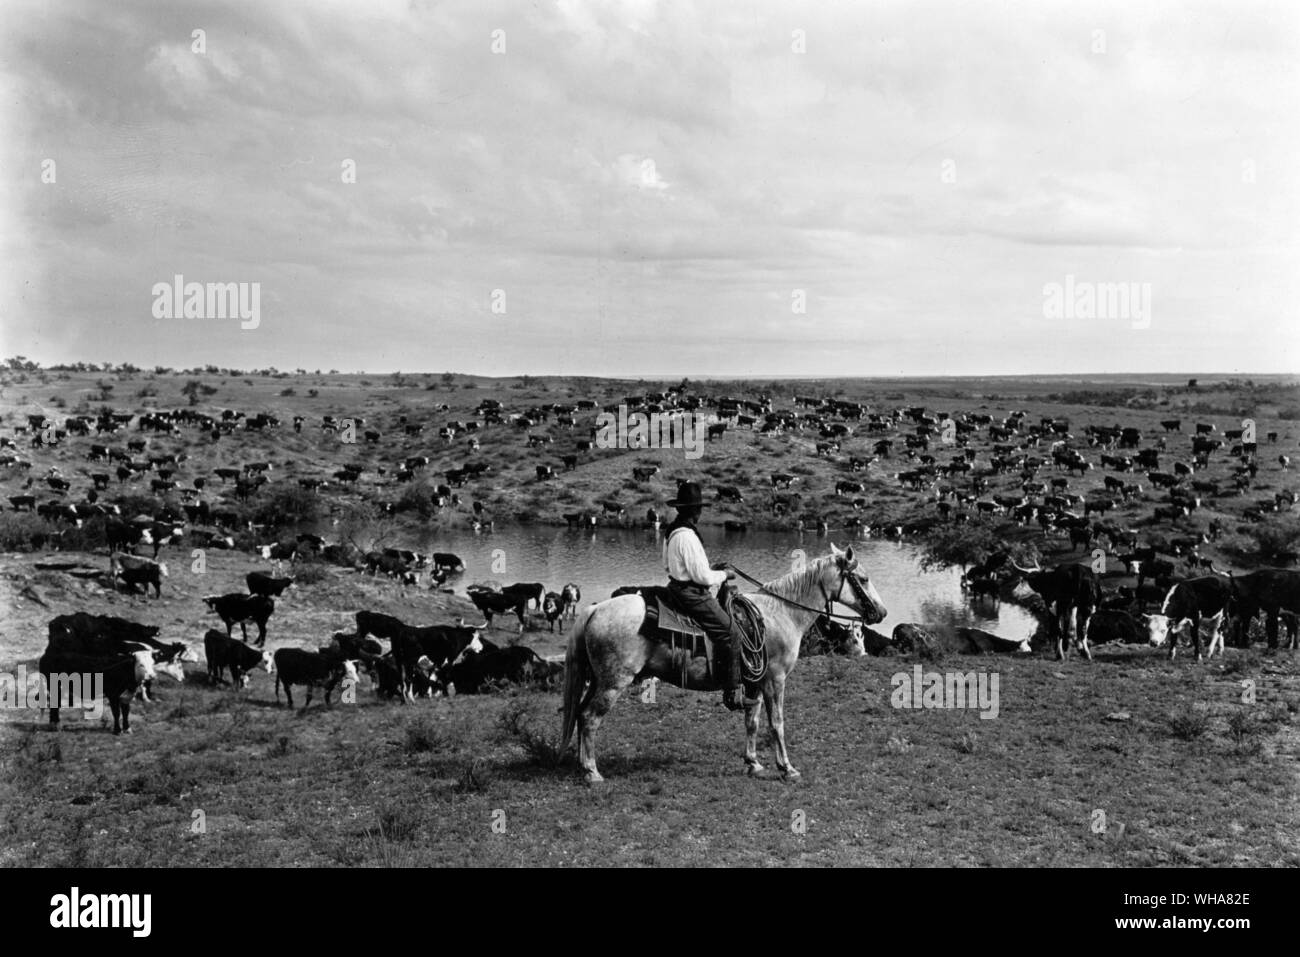 Cowboy on horseback attending cattle at a watering hole Stock Photo